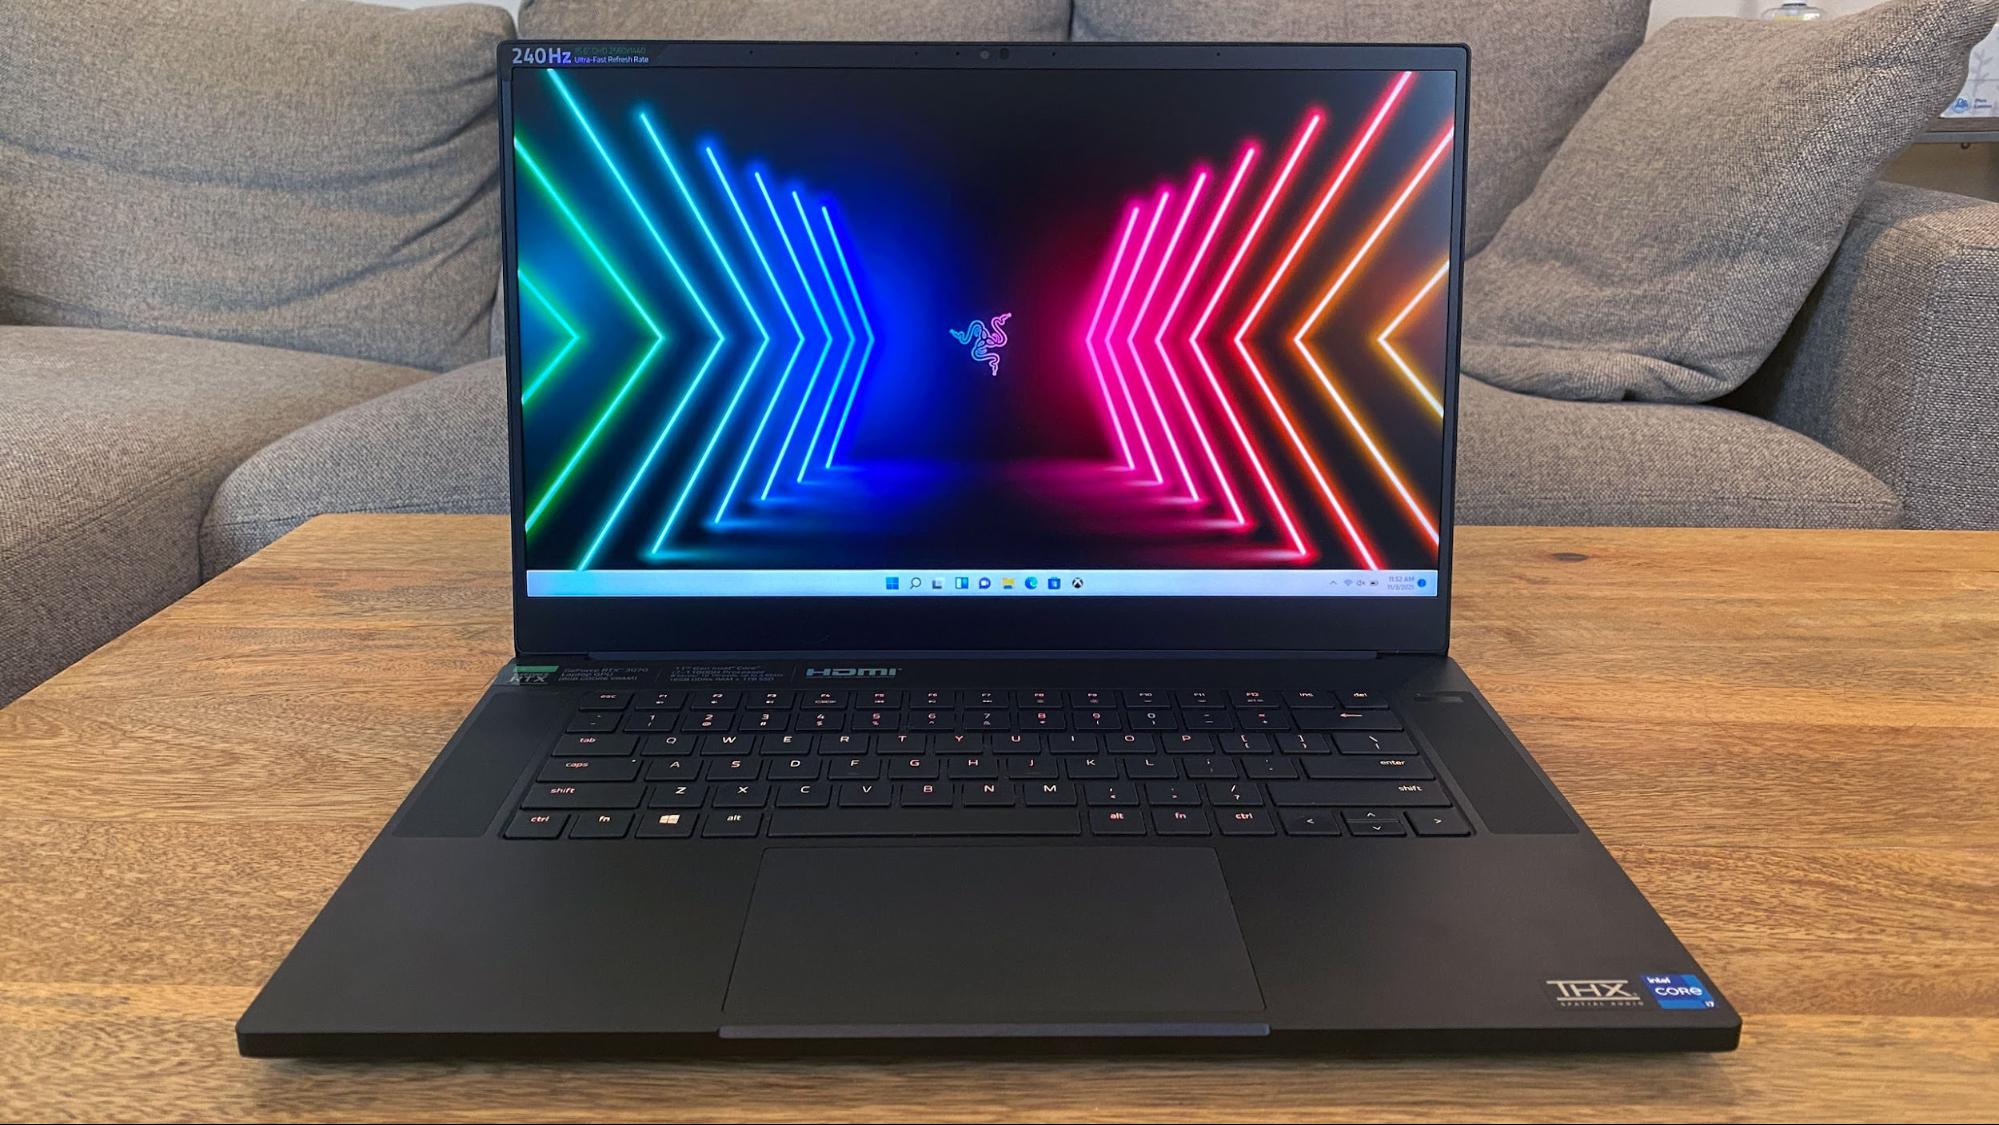 Best Thin and Light Gaming Laptop: Razer Blade 15 Advanced Model (Late 2021)